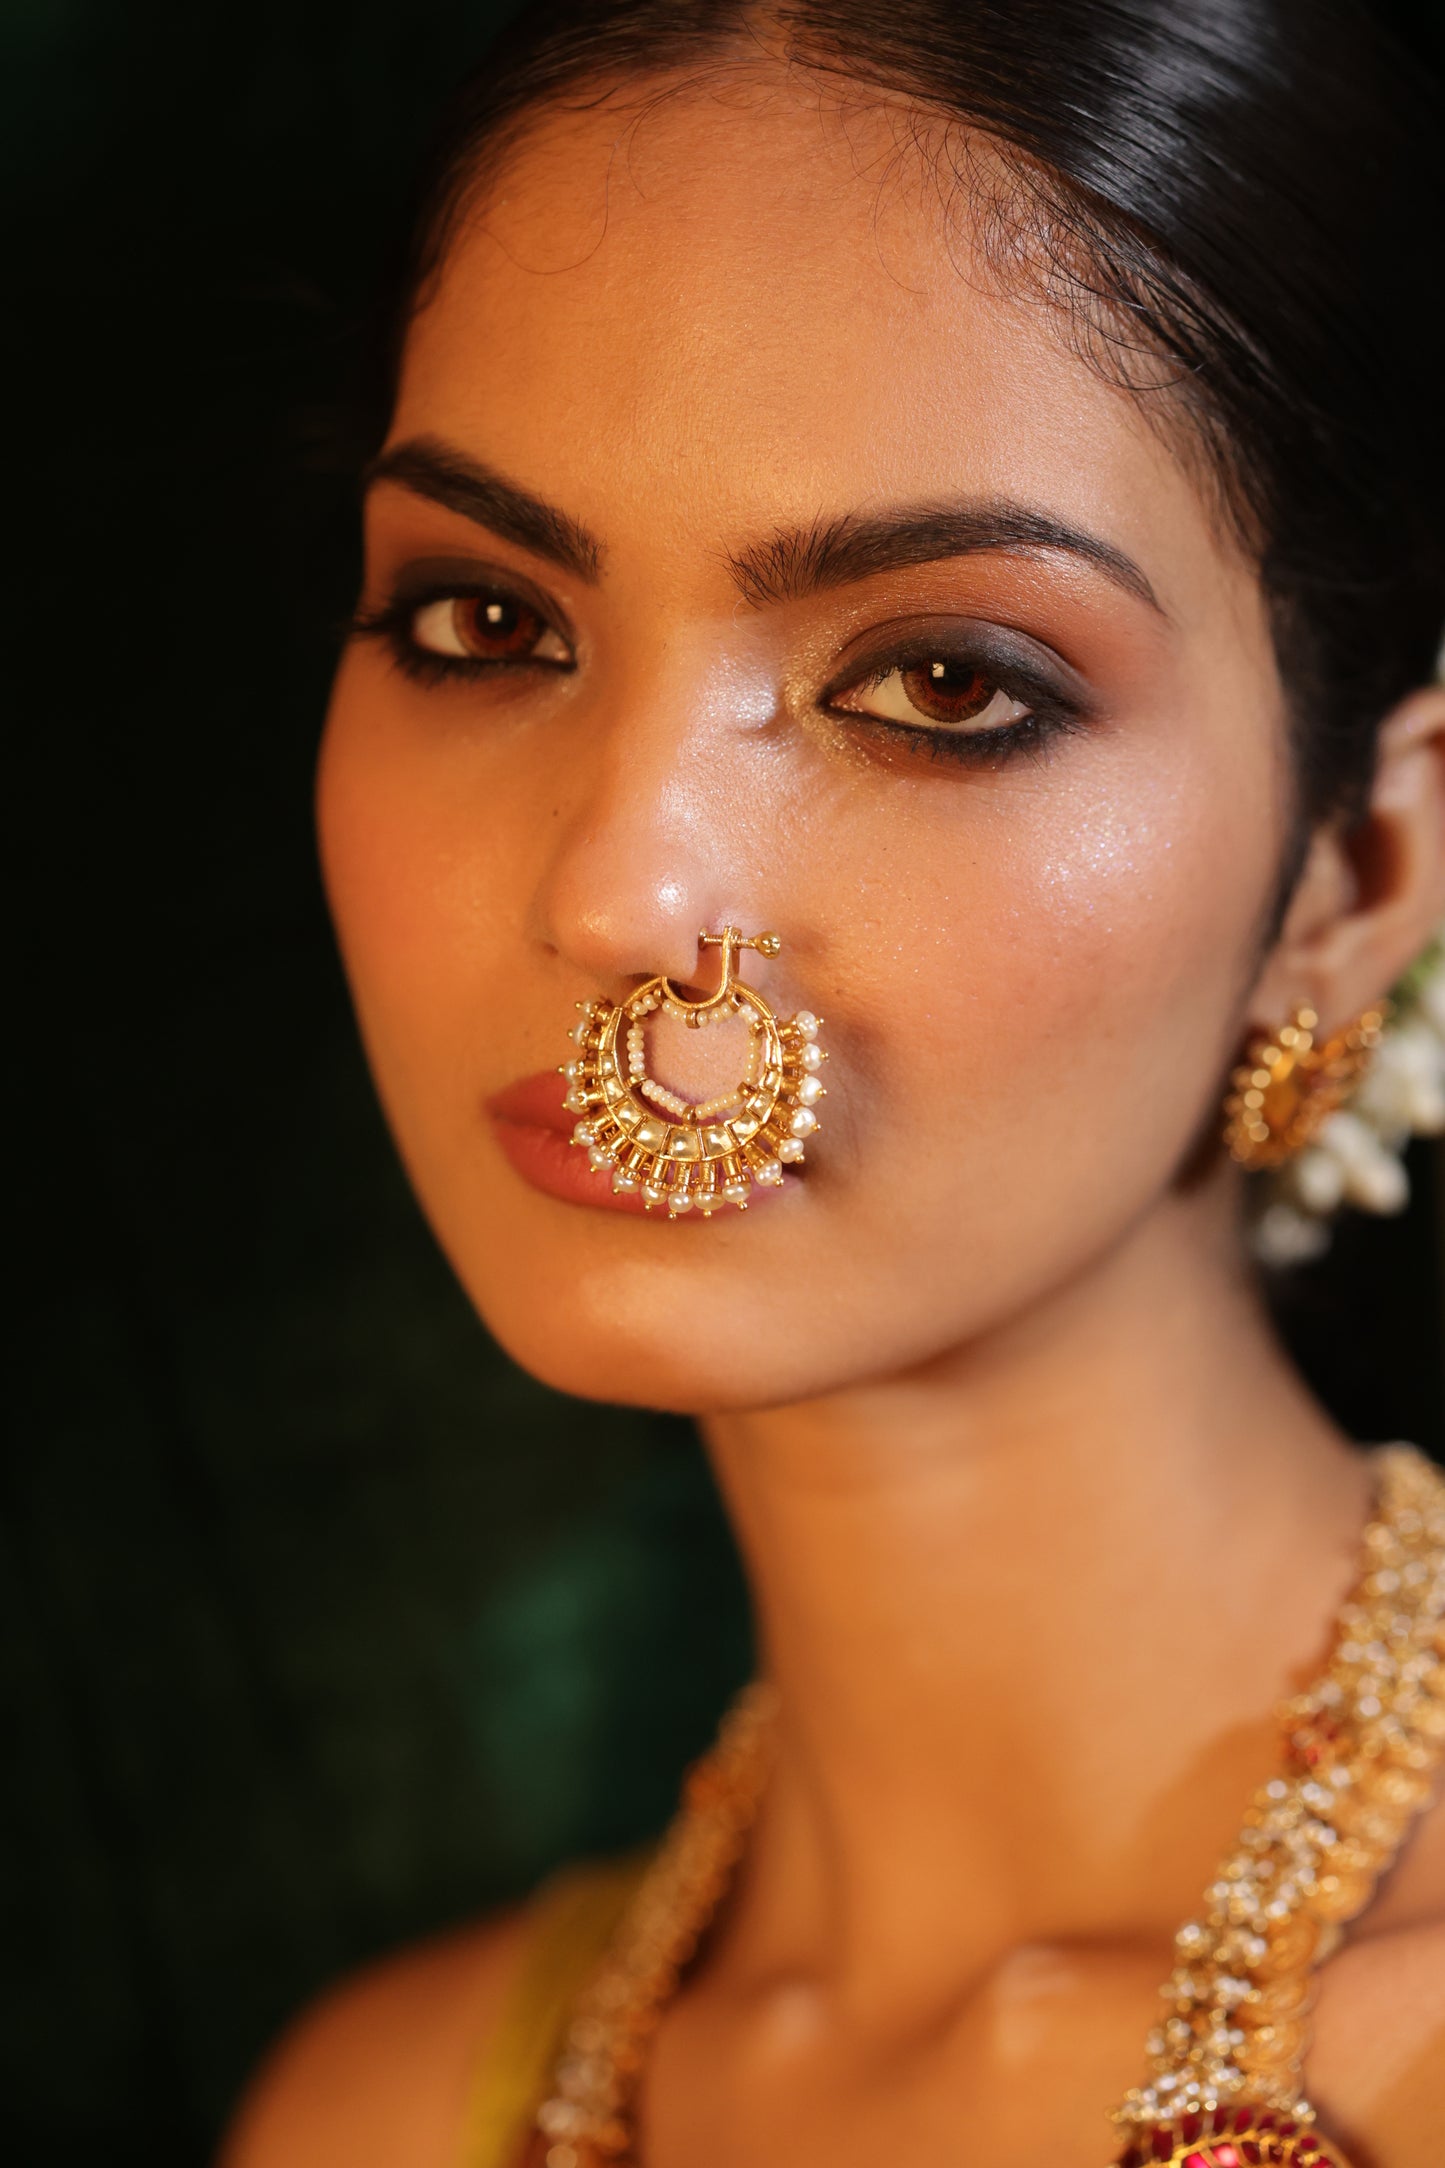 BALA CRYSTAL AND
PEARLS, GOLD PLATED SILVER, NOSE RING